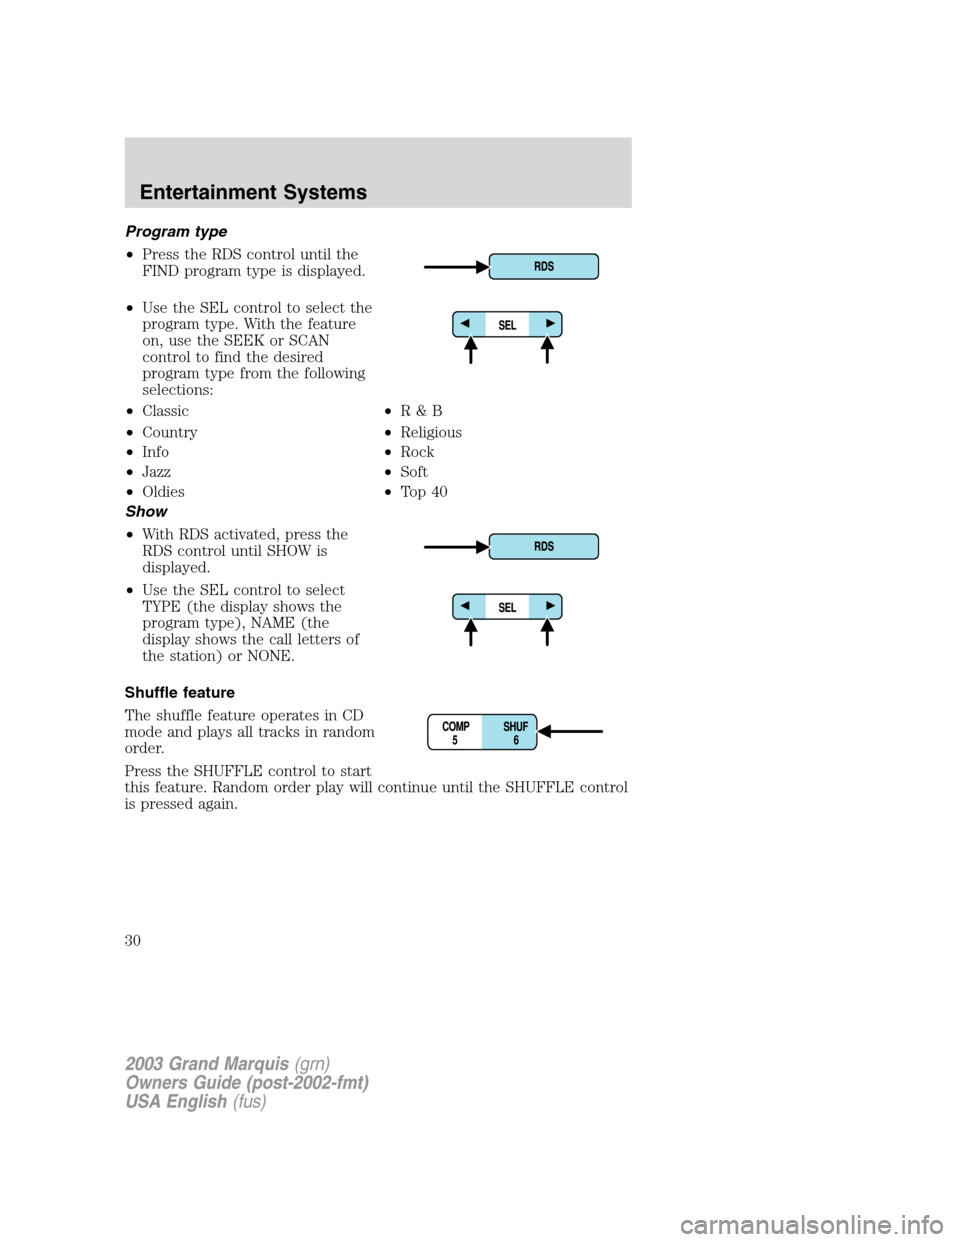 Mercury Grand Marquis 2003  Owners Manuals Program type
•Press the RDS control until the
FIND program type is displayed.
•Use the SEL control to select the
program type. With the feature
on, use the SEEK or SCAN
control to find the desired